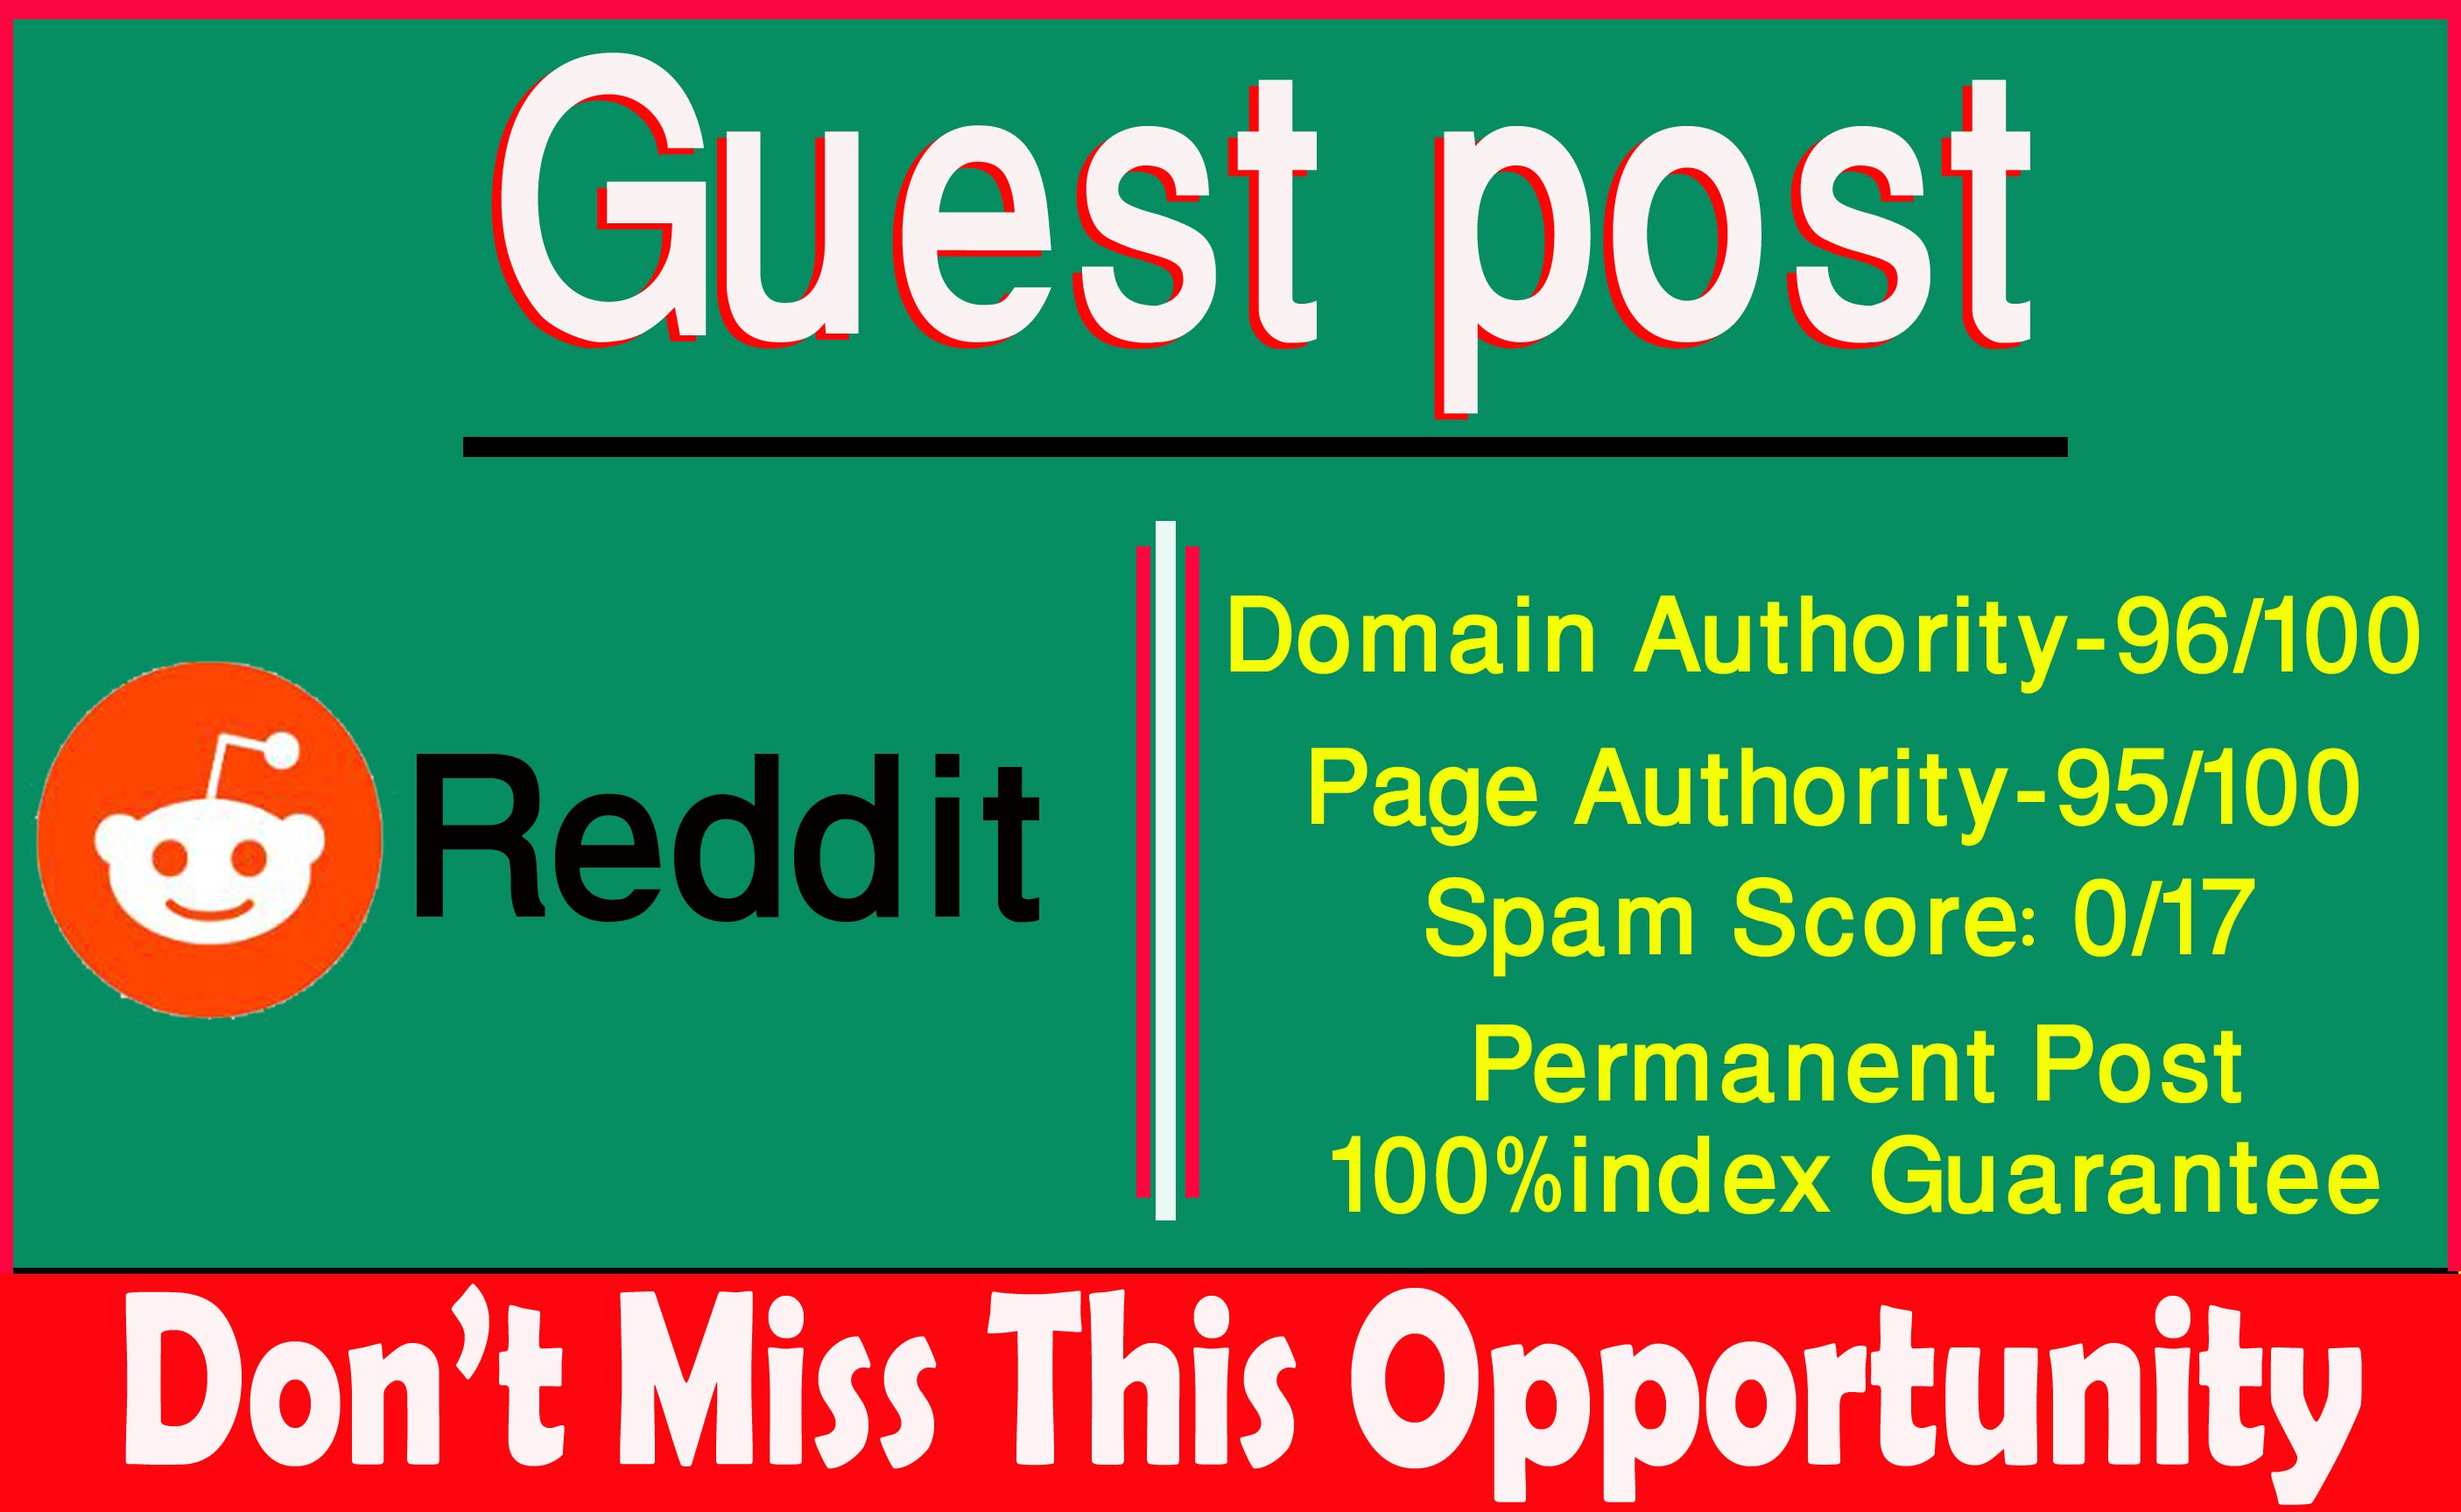 Write And Publish Guest Post